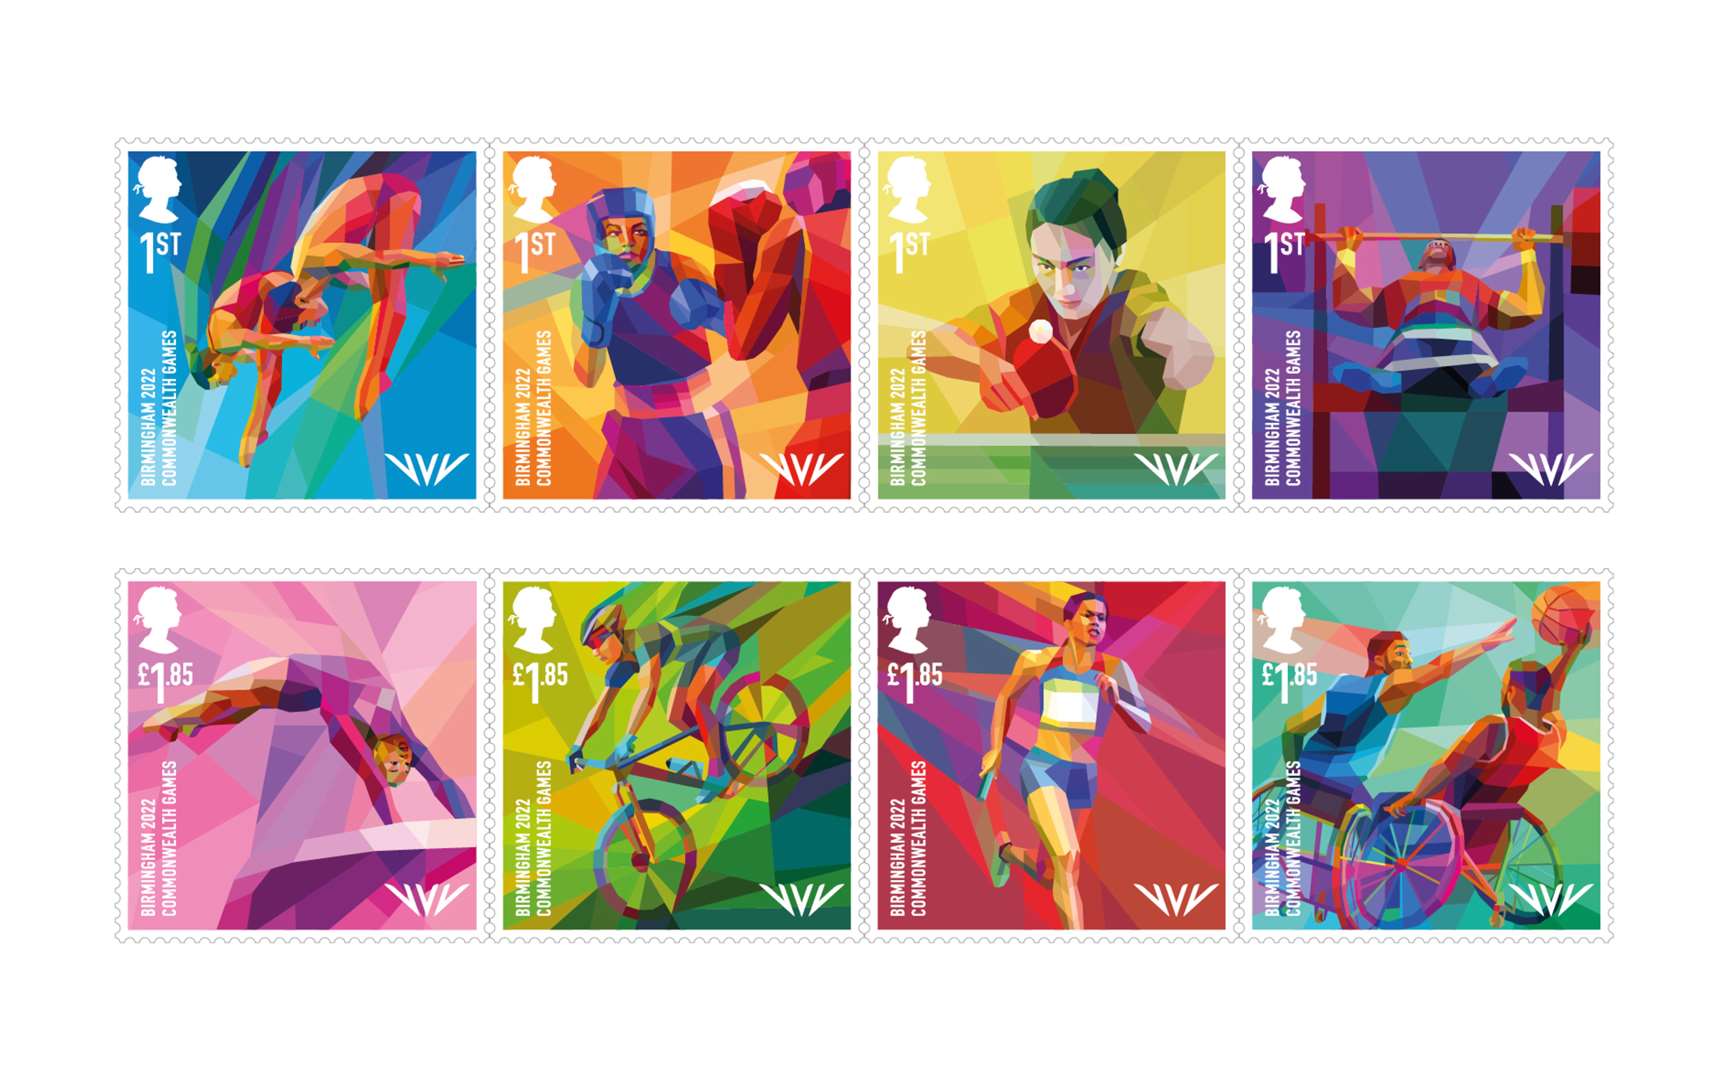 Specially designed stamps which carry a picture don't need to be swapped and remain valid. Image: Royal Mail.